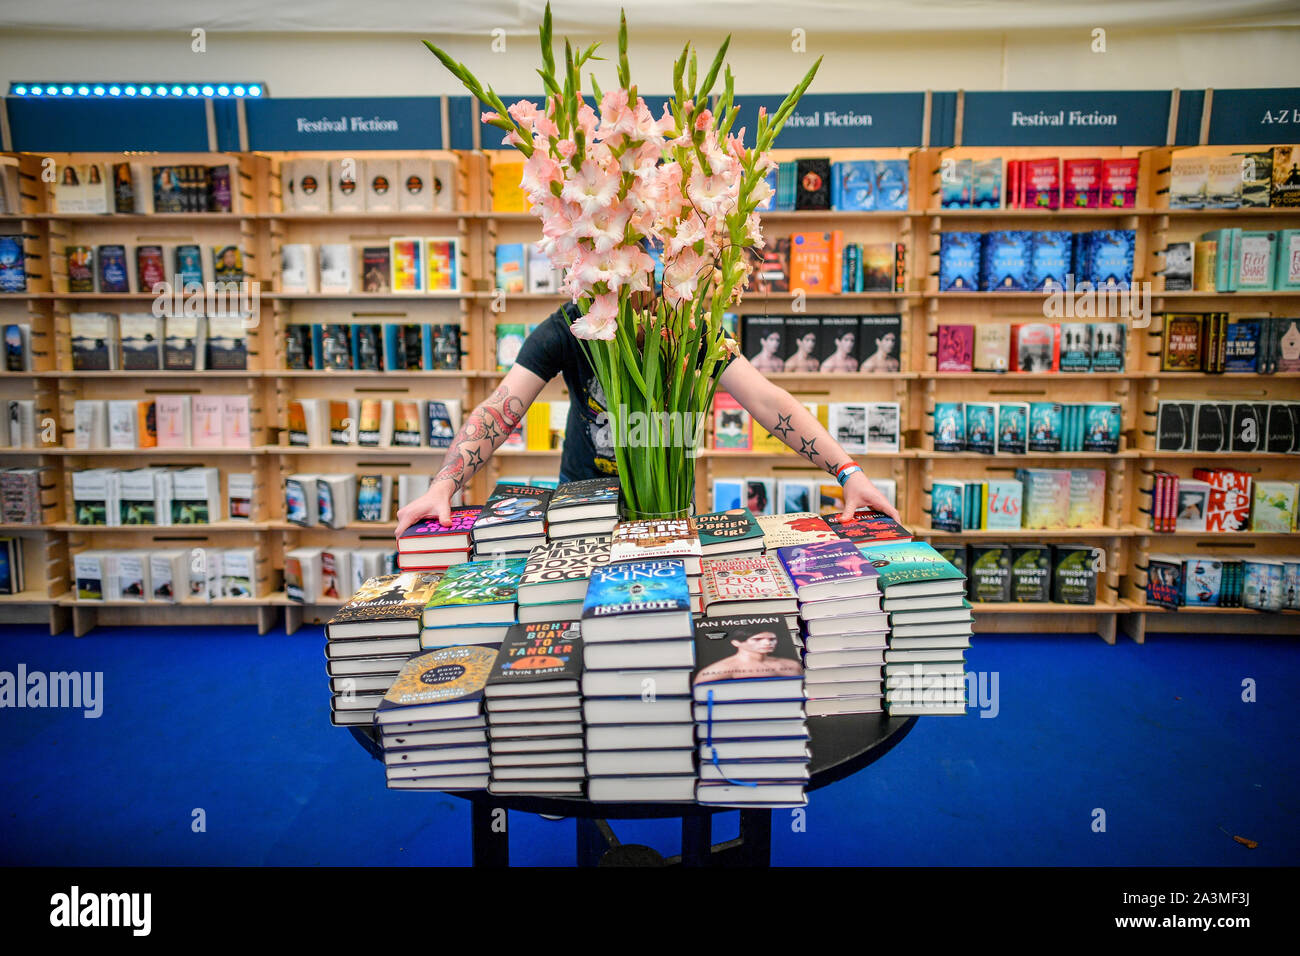 A worker organises and straightens books in a bookstore at Cheltenham Literature Festival, the longest running Literature Festival in the world which is celebrating its 70th year. Stock Photo